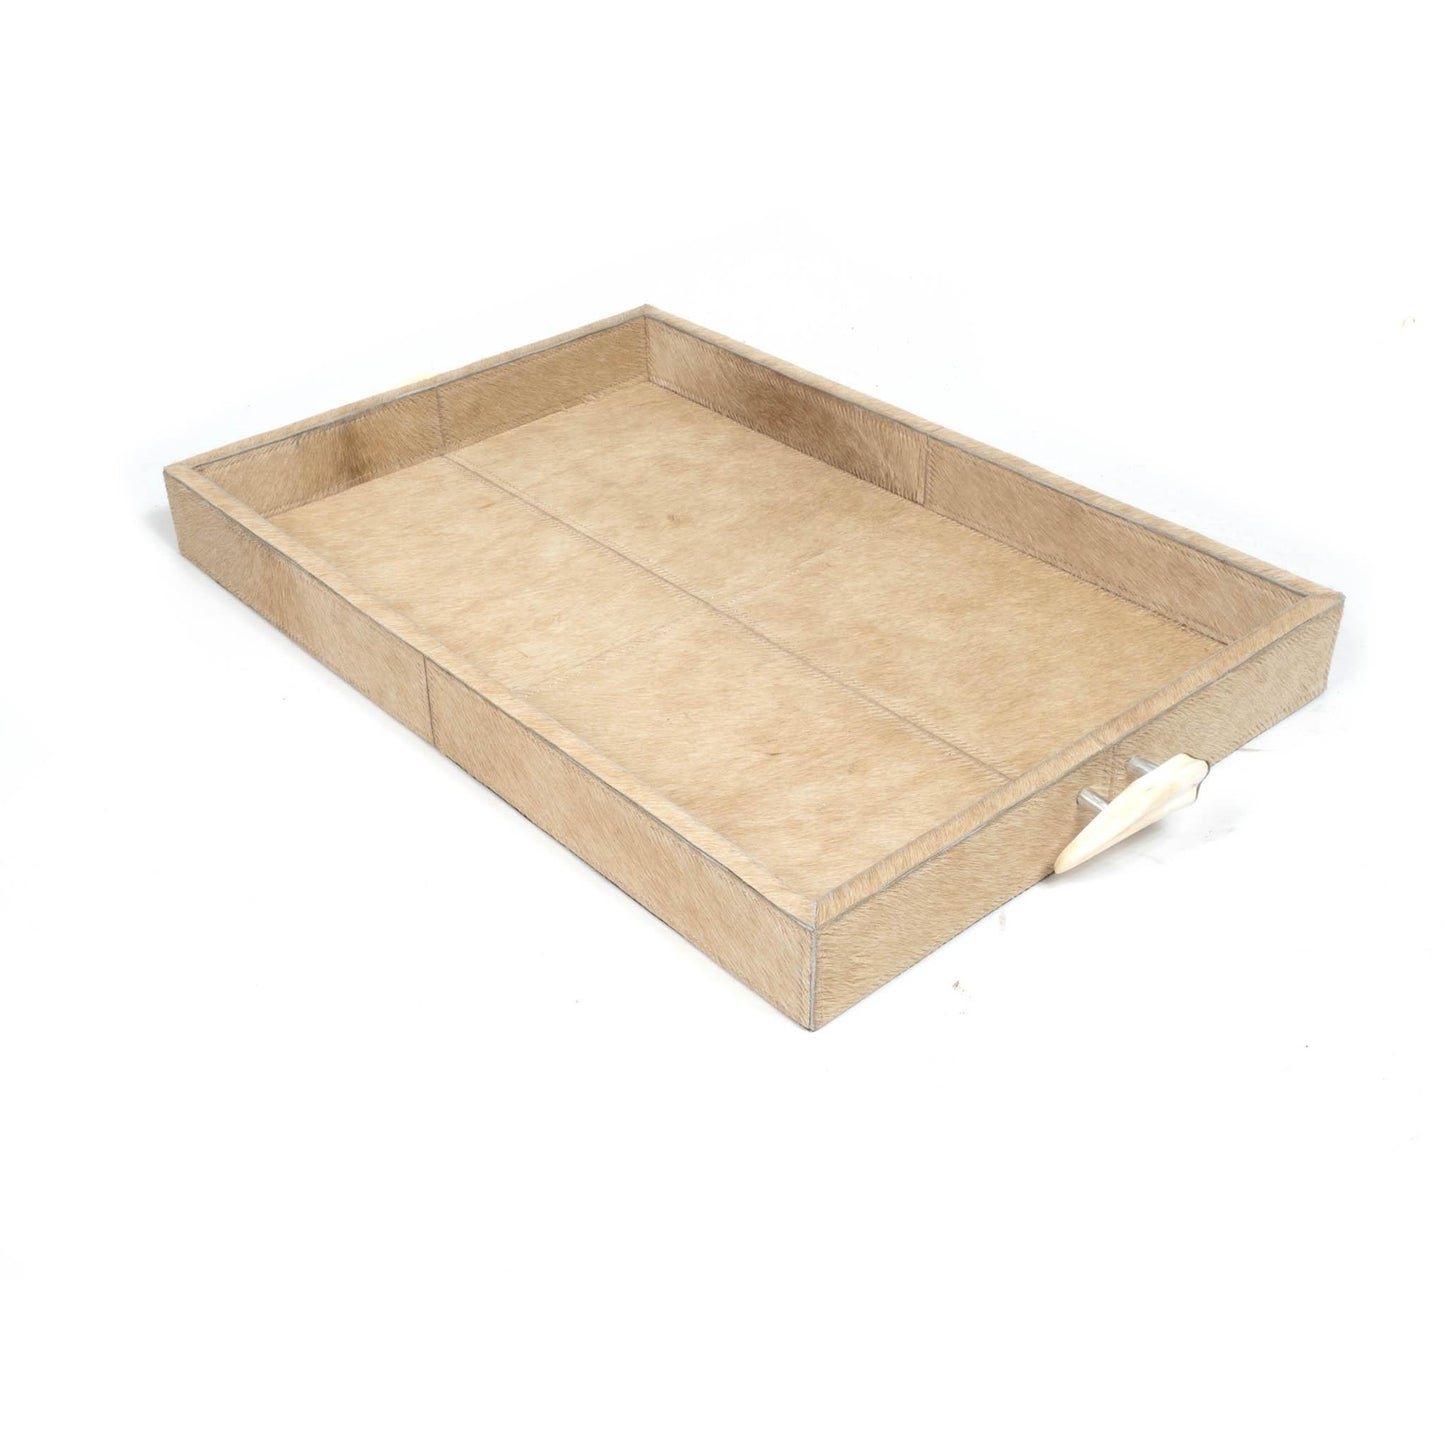 Cream Cow Hide Tray with Warthog Tusk Handles